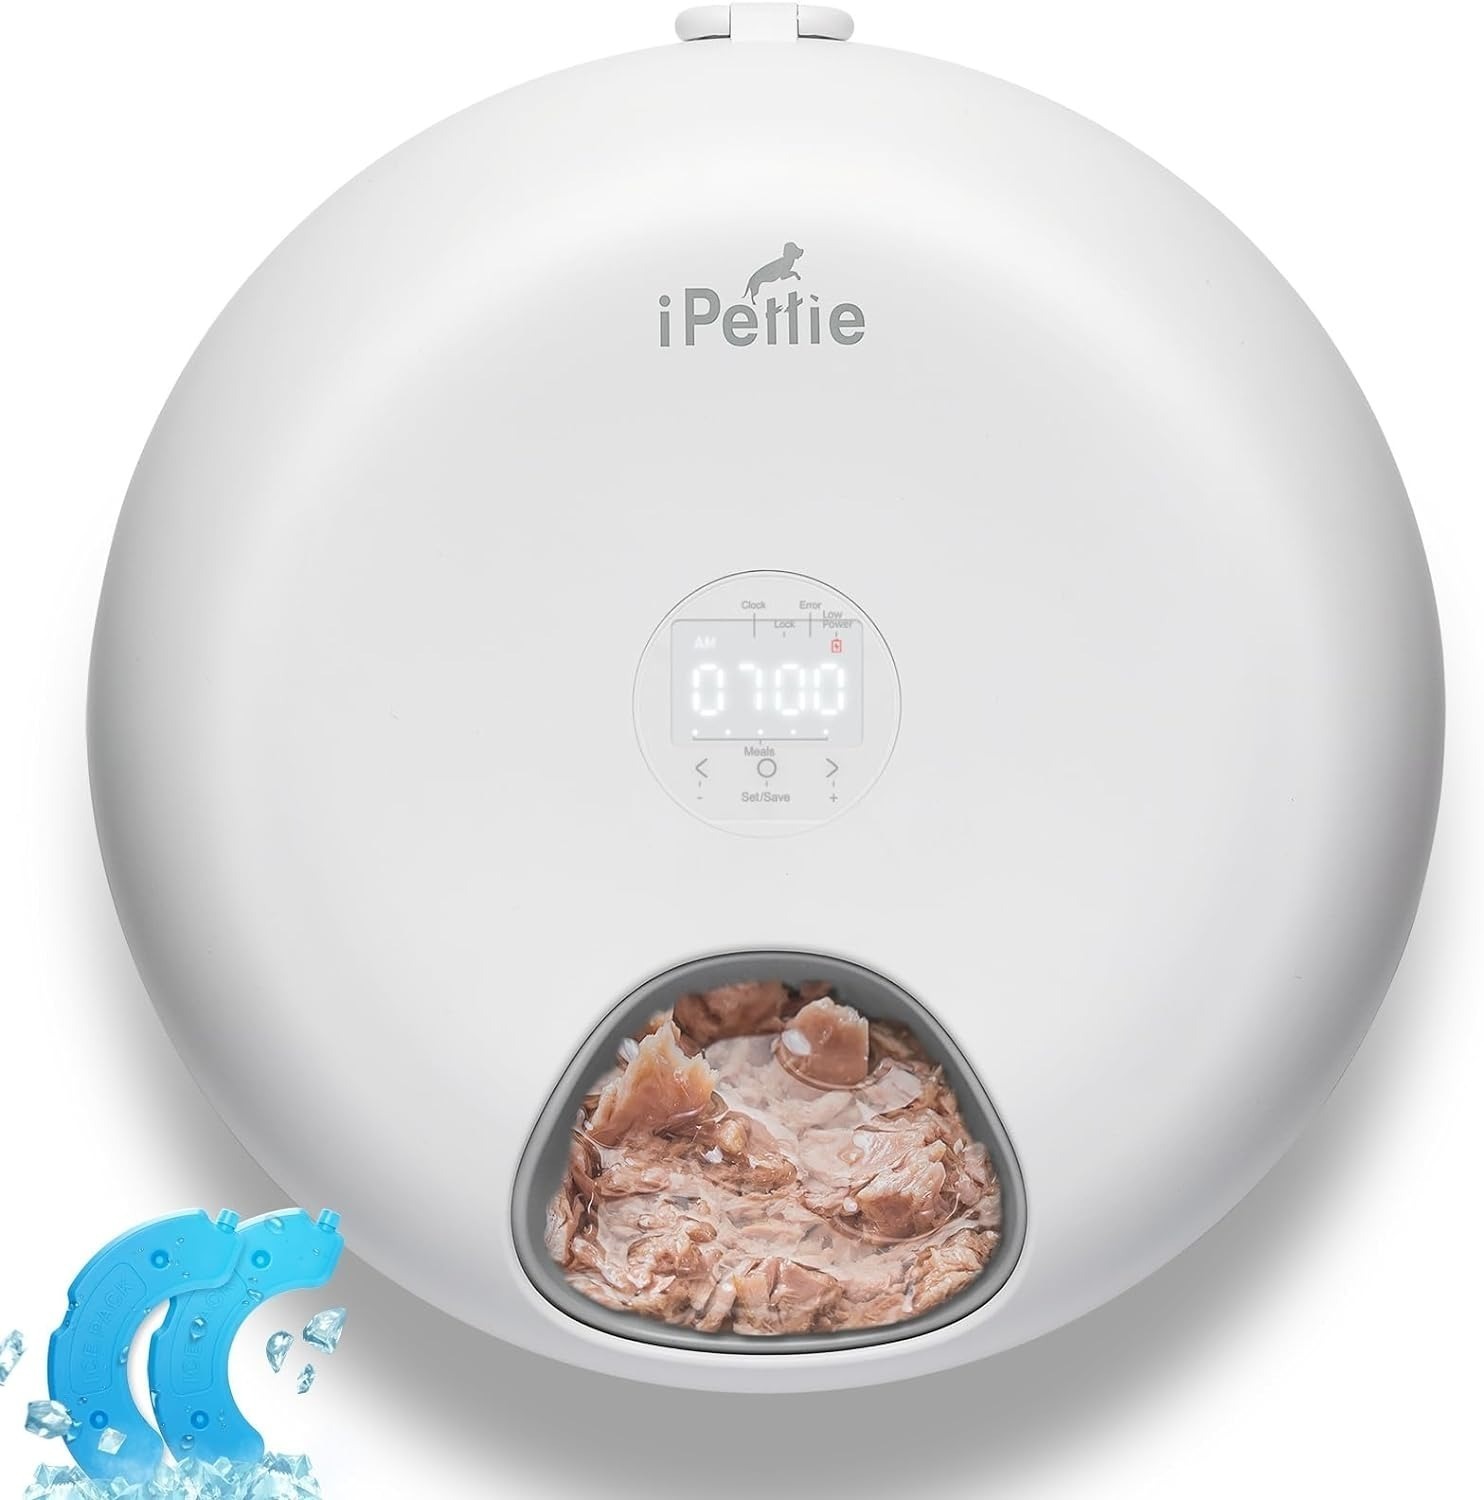 iPettie 6 Cordless Automatic Programable Pet Feeder (White, Non Wifi Enabled) $40.50 + Free Shipping